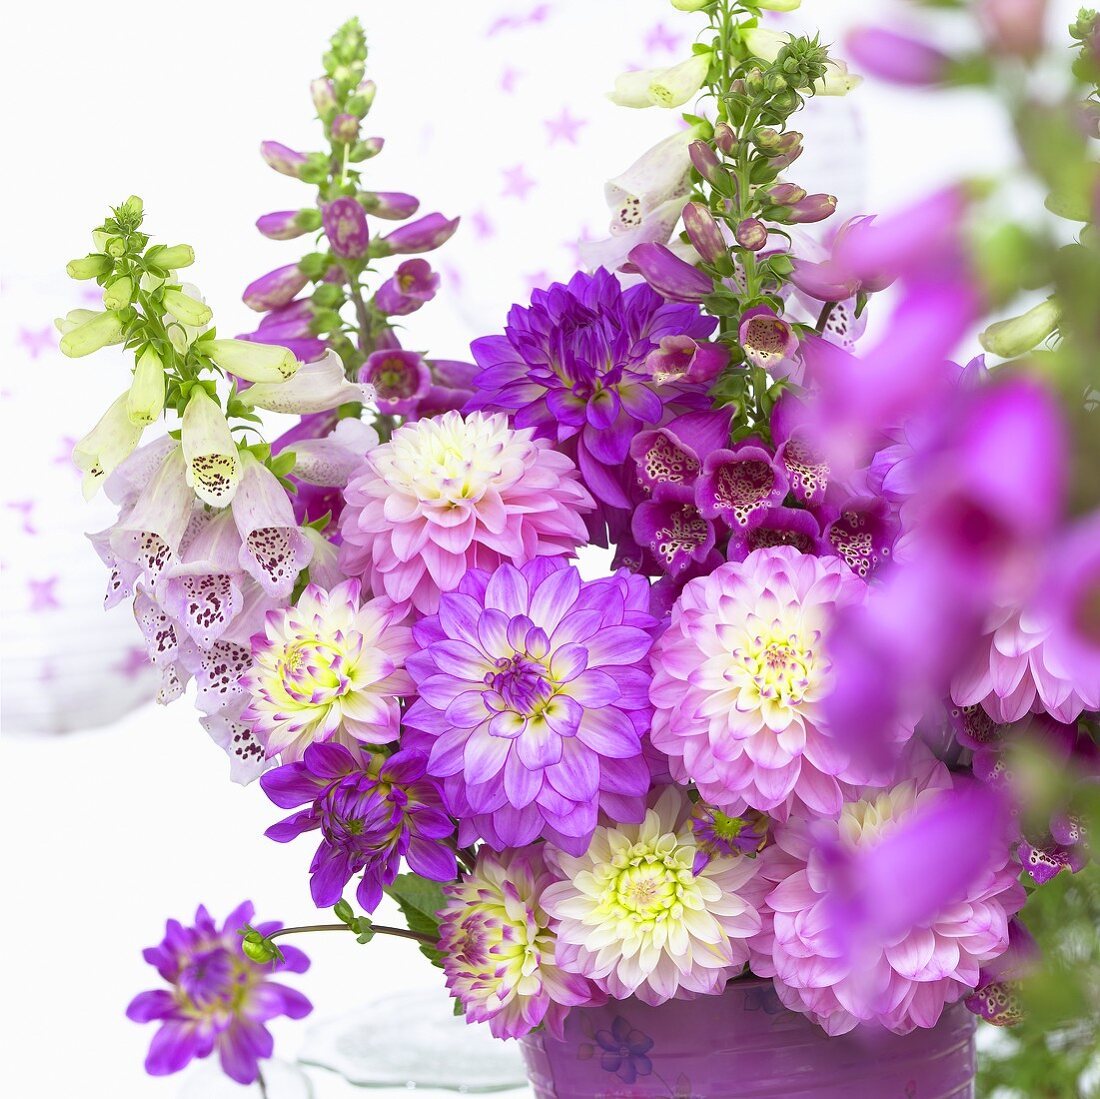 Arrangement of dahlias and other summer flowers in pink